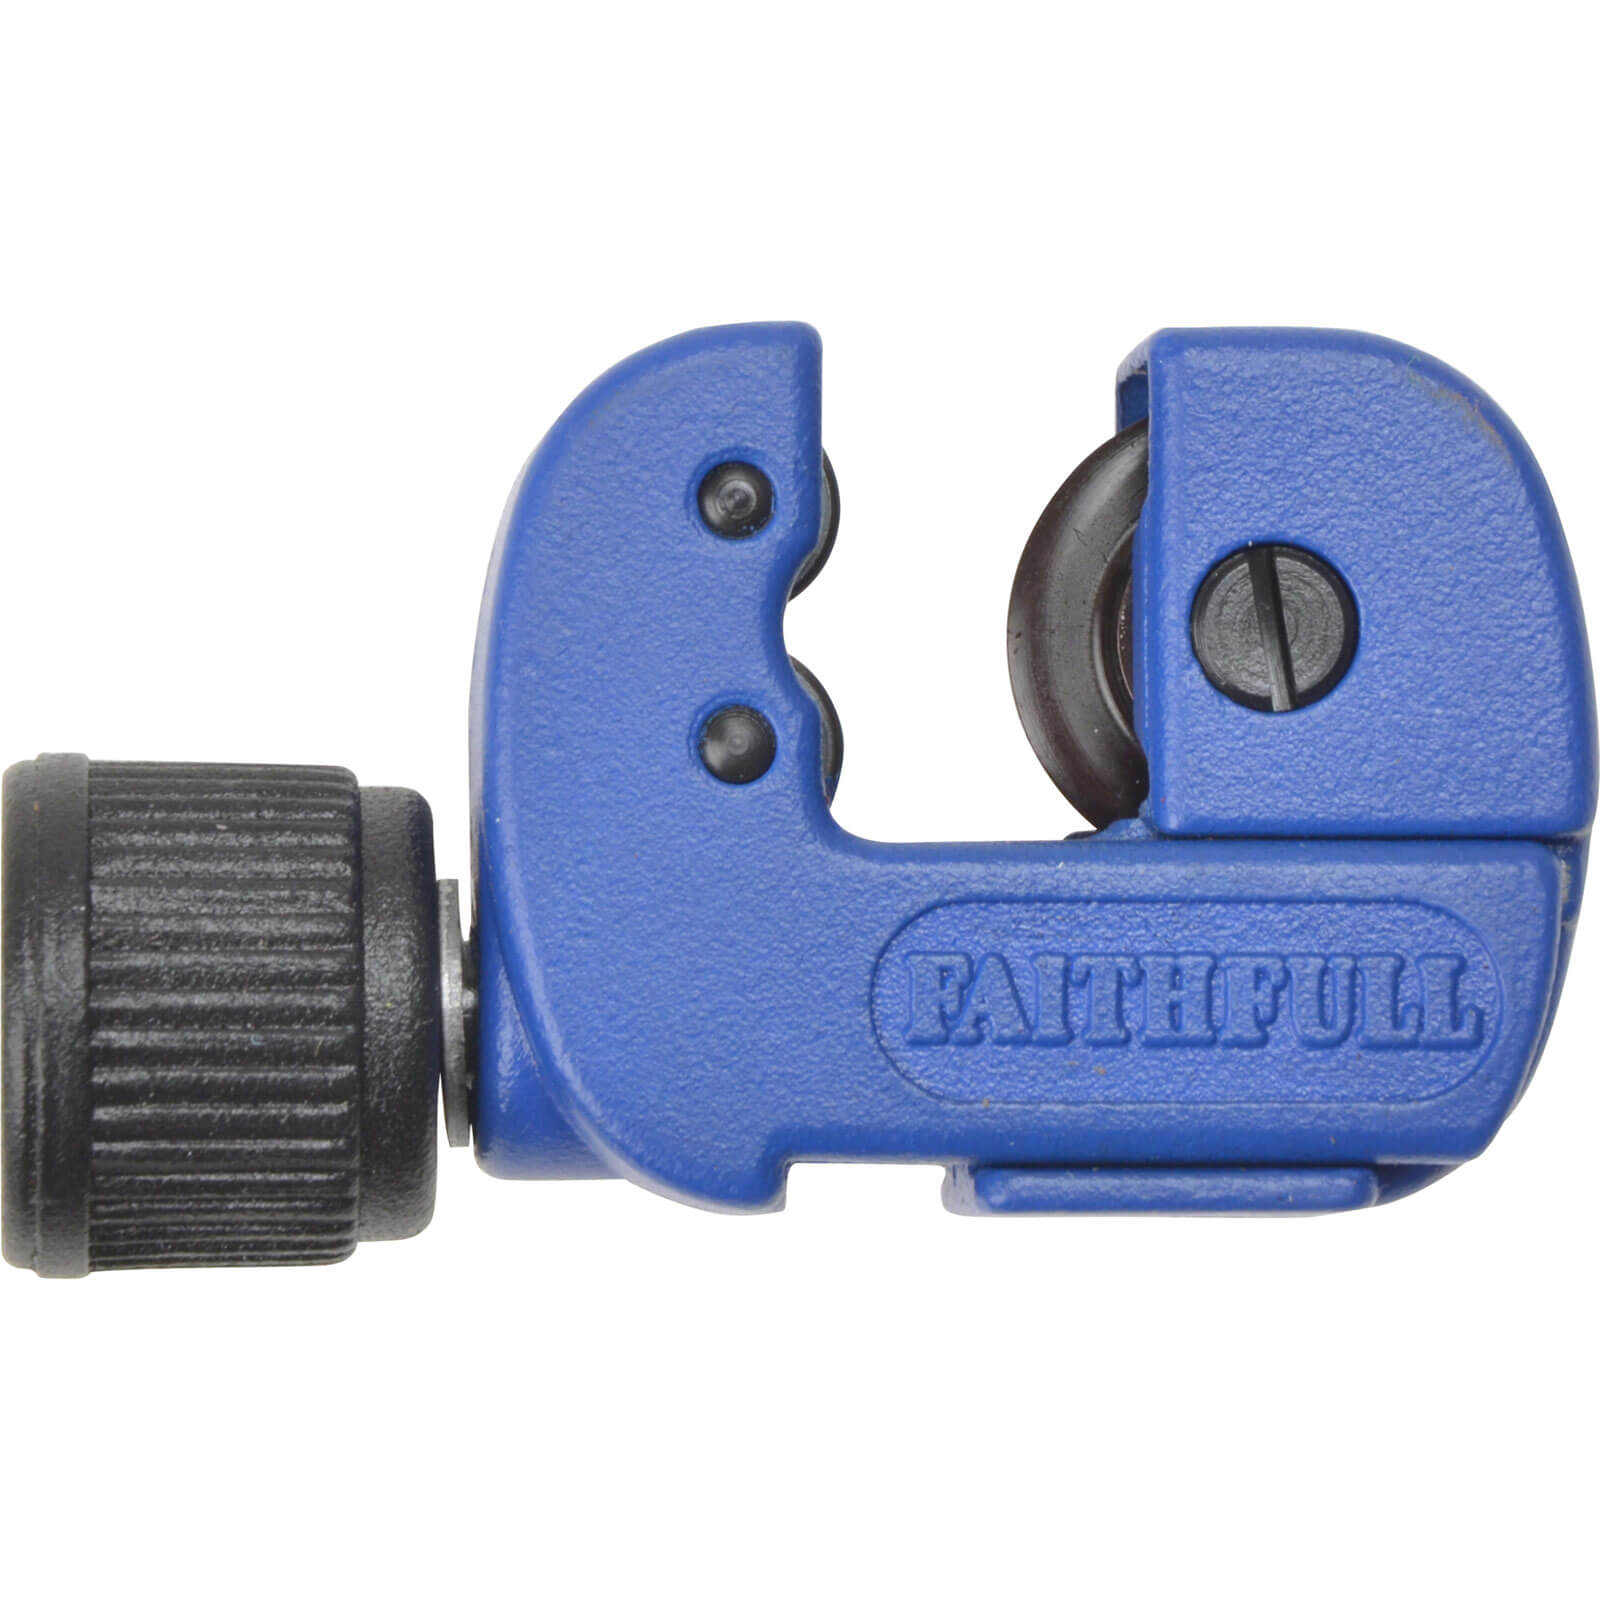 Image of Faithfull Adjustable Pipe Cutter 3mm - 16mm